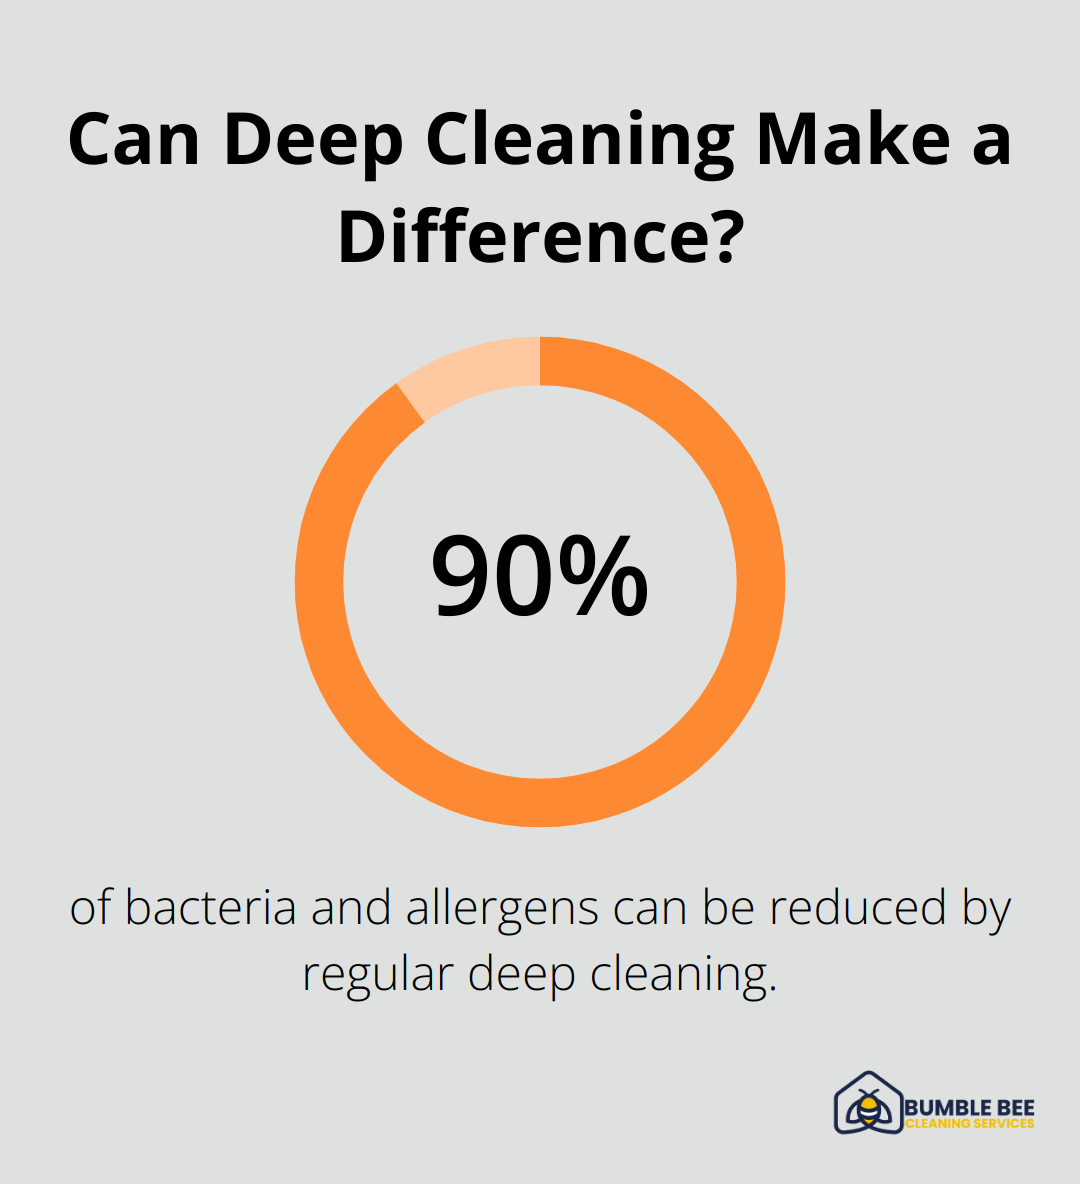 Can Deep Cleaning Make a Difference?